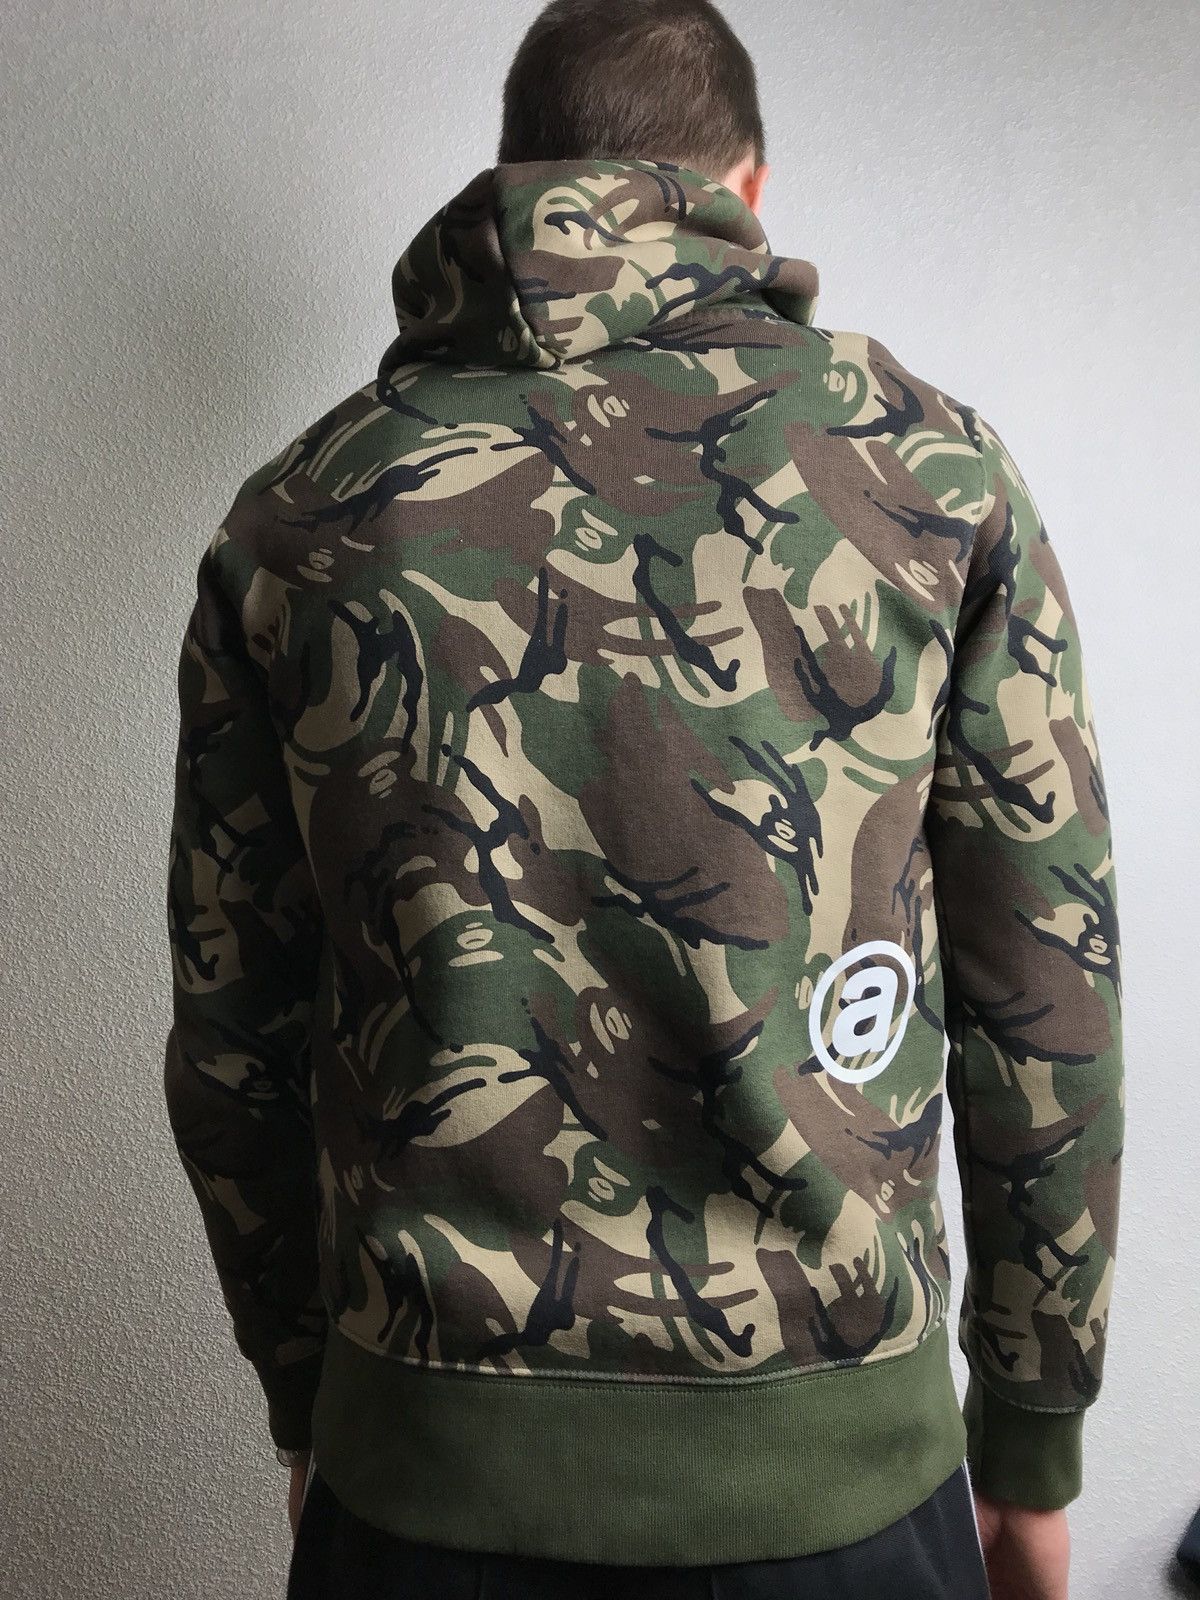 Bape Aape A Bathing Ape Camouflage Full Zip Hoodie Size US M / EU 48-50 / 2 - 12 Preview